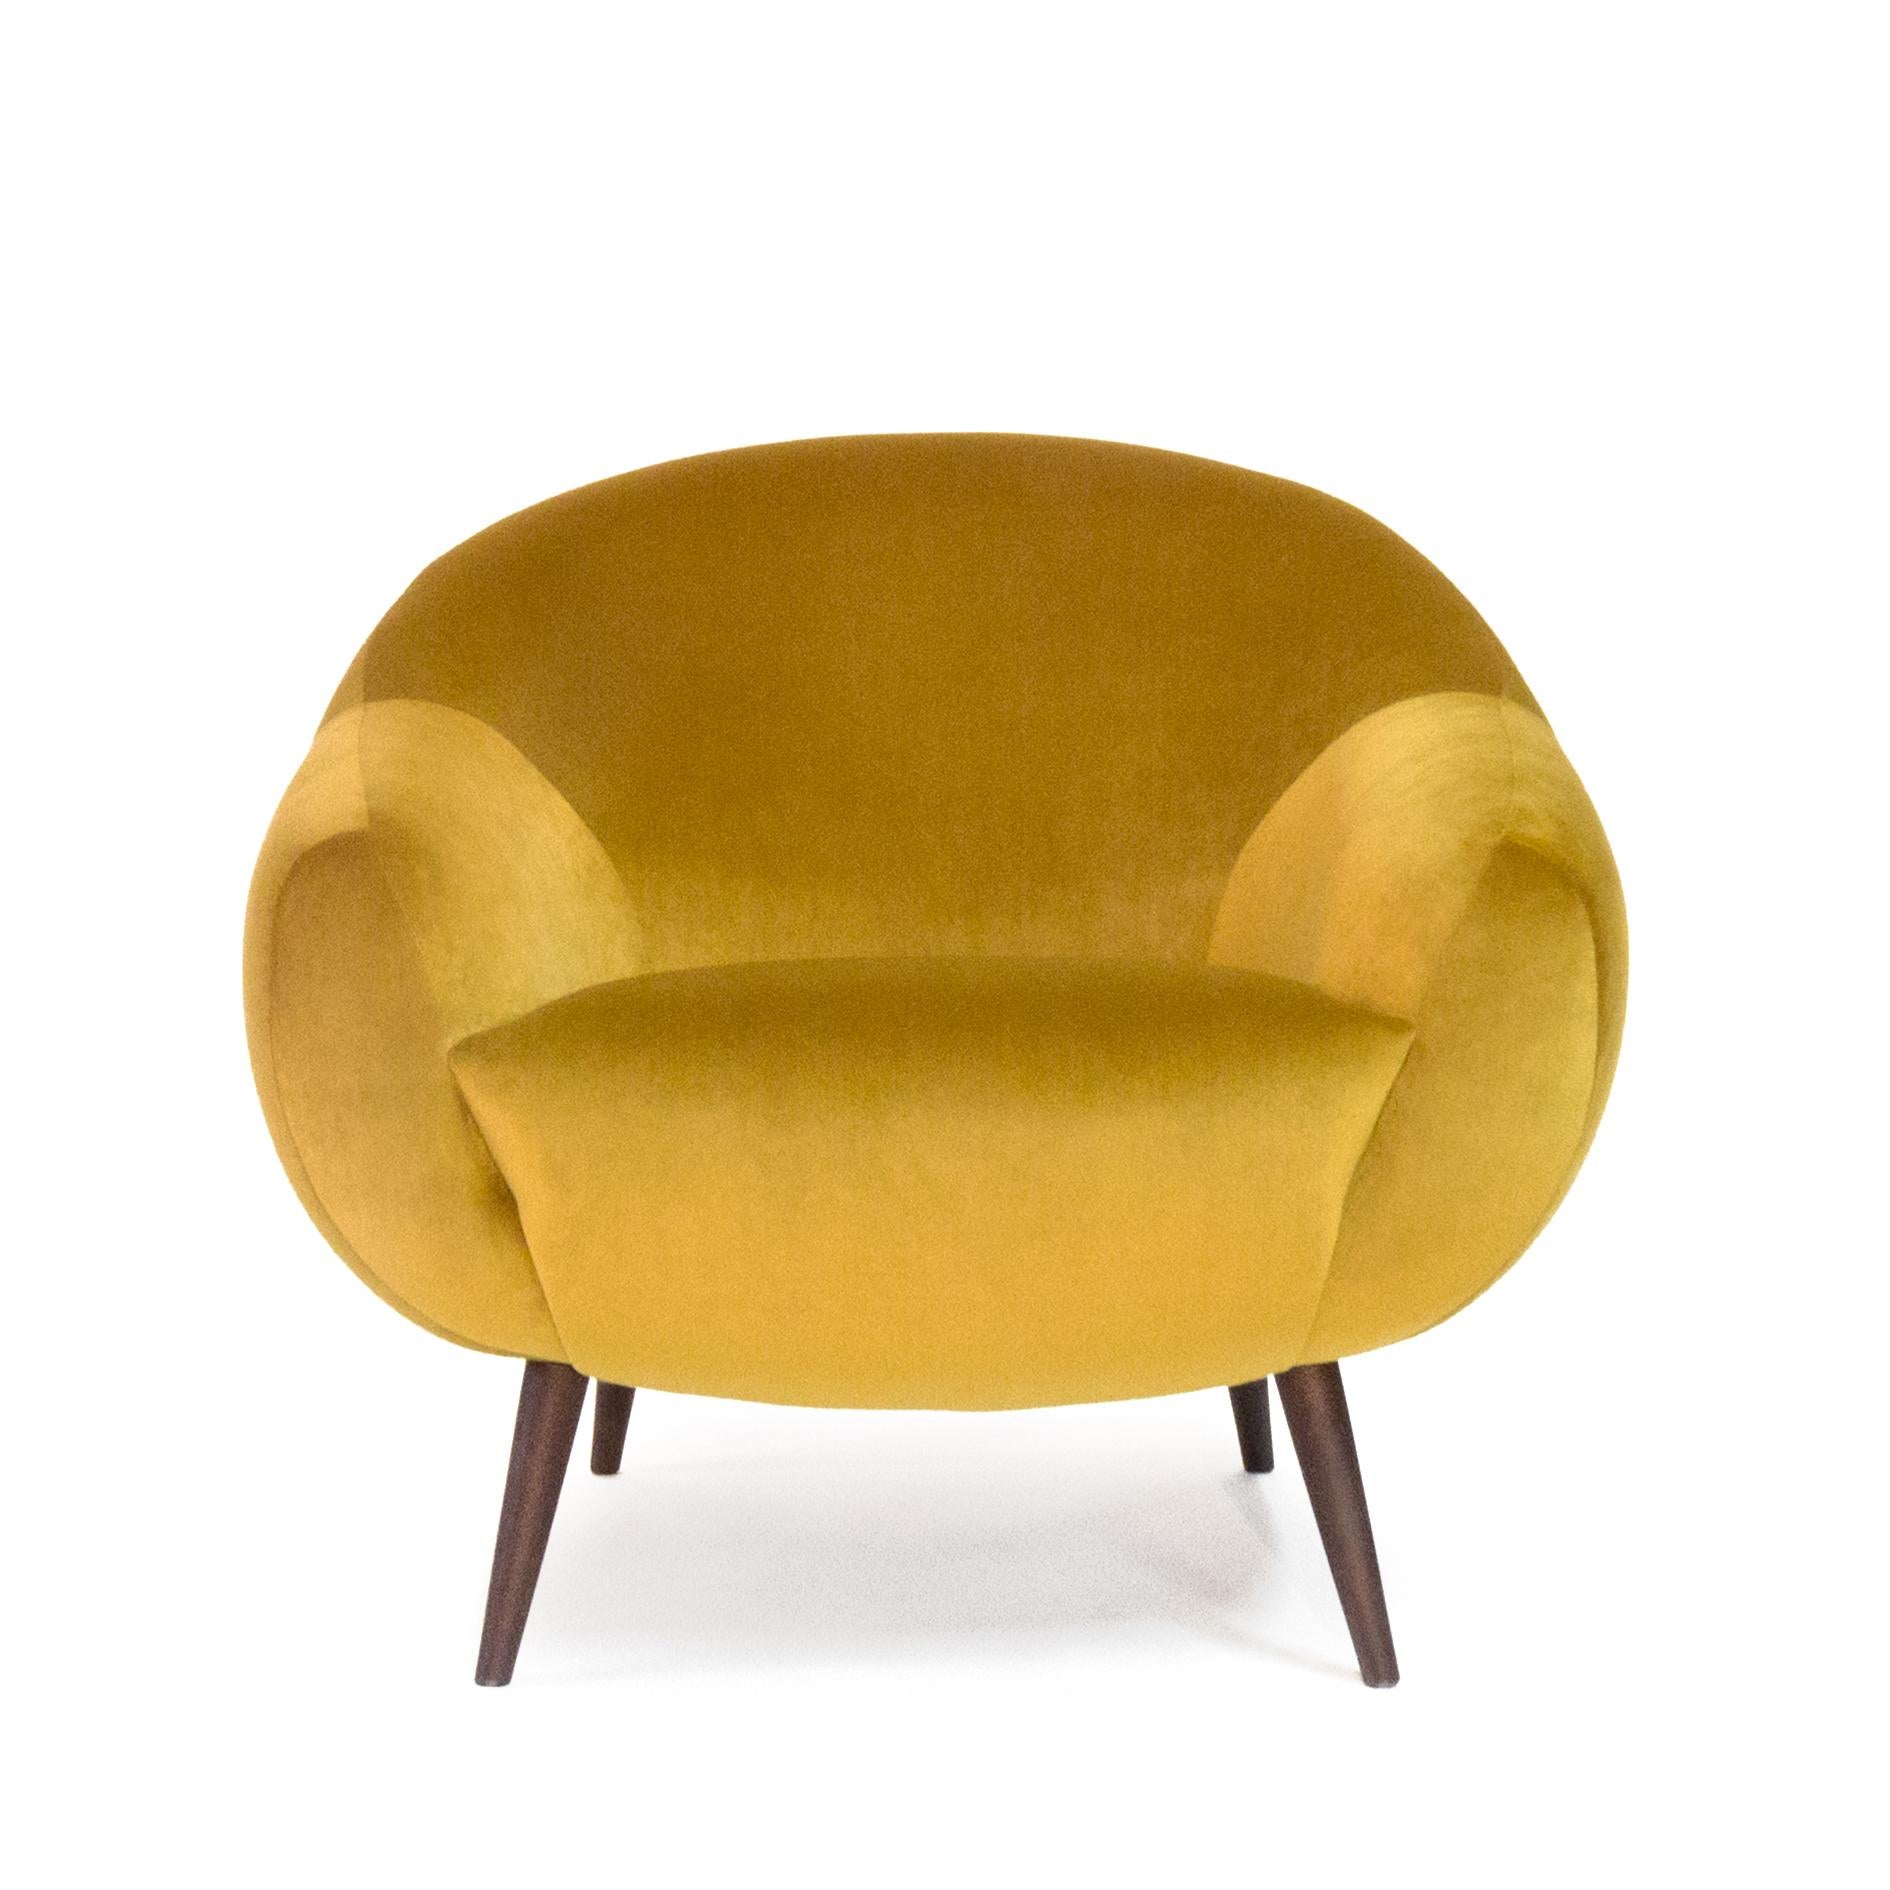 Golden Winner at the Muse Design Awards Competition 2022

The Niemeyer armchair is named after the Brazilian Architect Oscar Niemeyer whose Architecture was spread like sculptural poetry in the History of humankind.
The rounded lines of the armchair